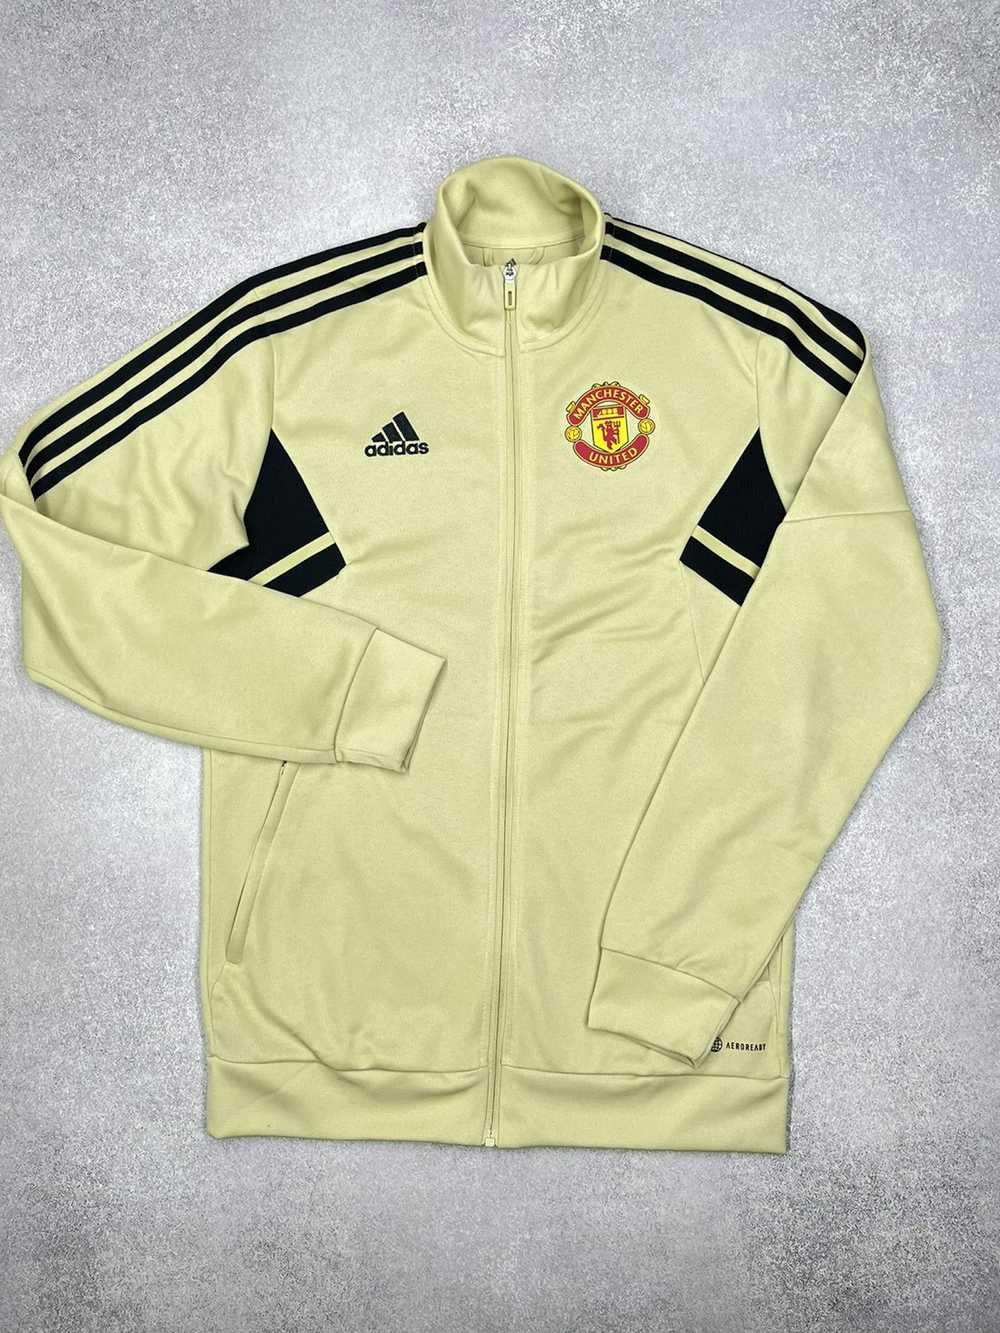 Adidas × Manchester United × Soccer Jersey Mens A… - image 2